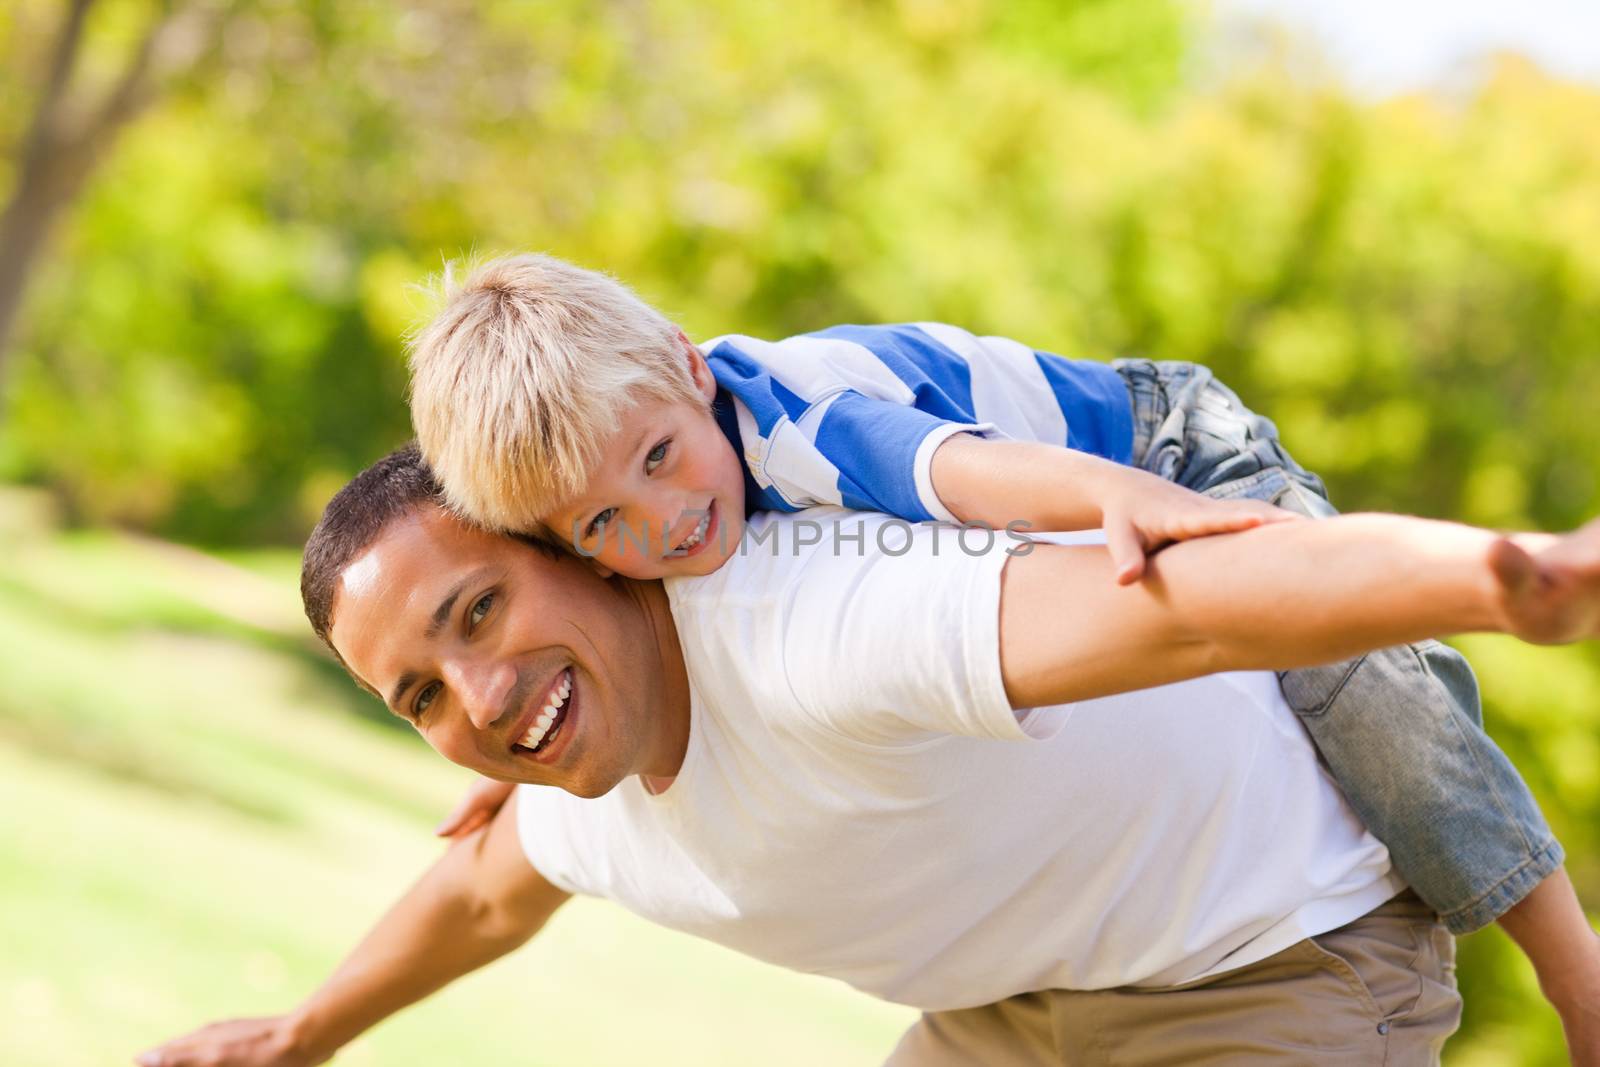 Son playing with his father in the park by Wavebreakmedia